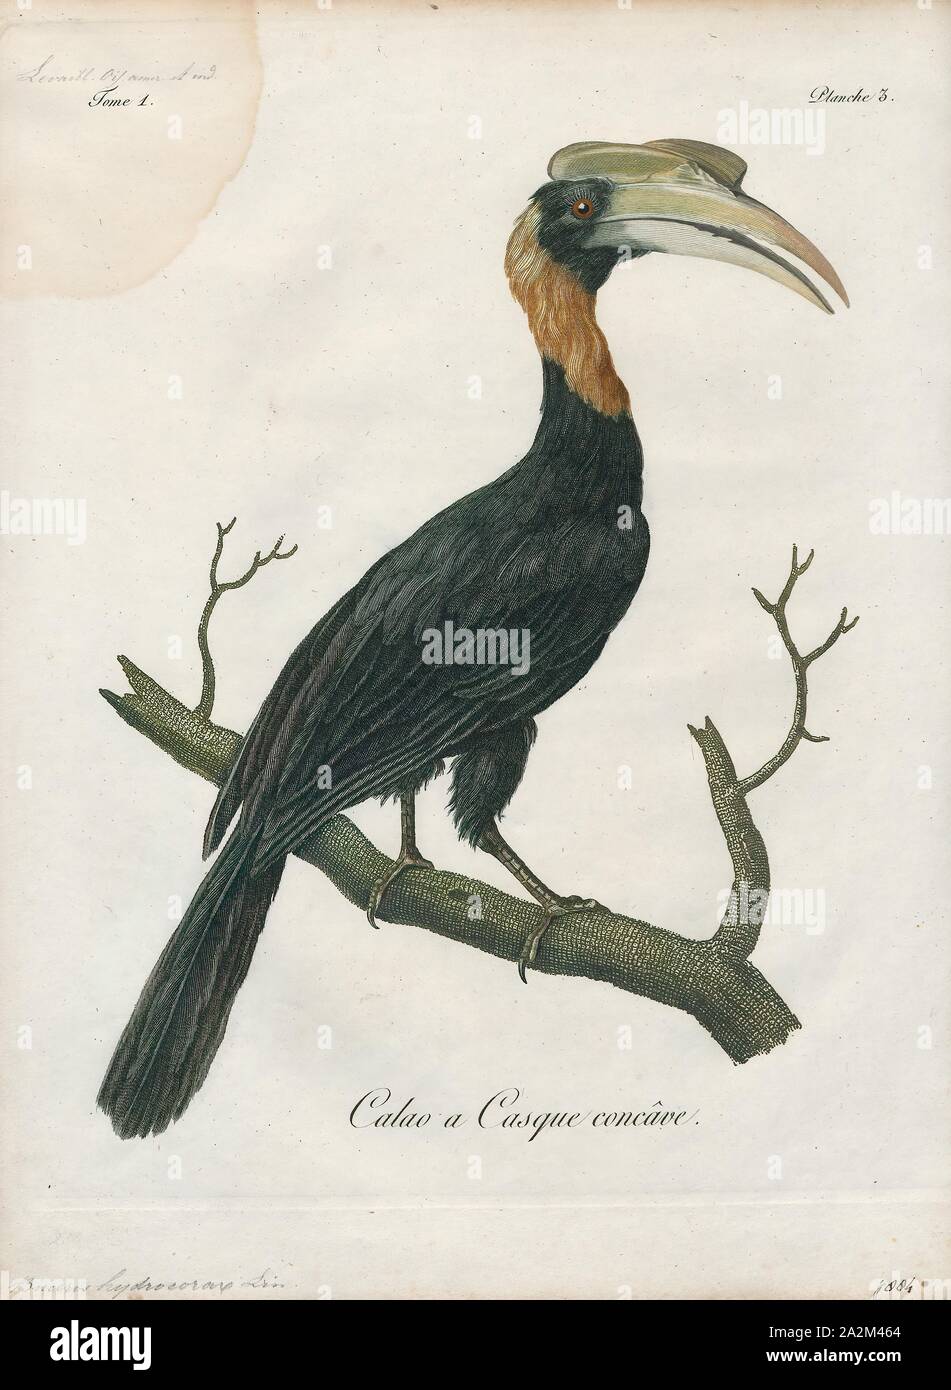 Buceros hydrocorax, Print, The rufous hornbill (Buceros hydrocorax), also known as the Philippine hornbill and locally as kalaw (pronounced kah-lau), is a large species of hornbill., 1801 Stock Photo